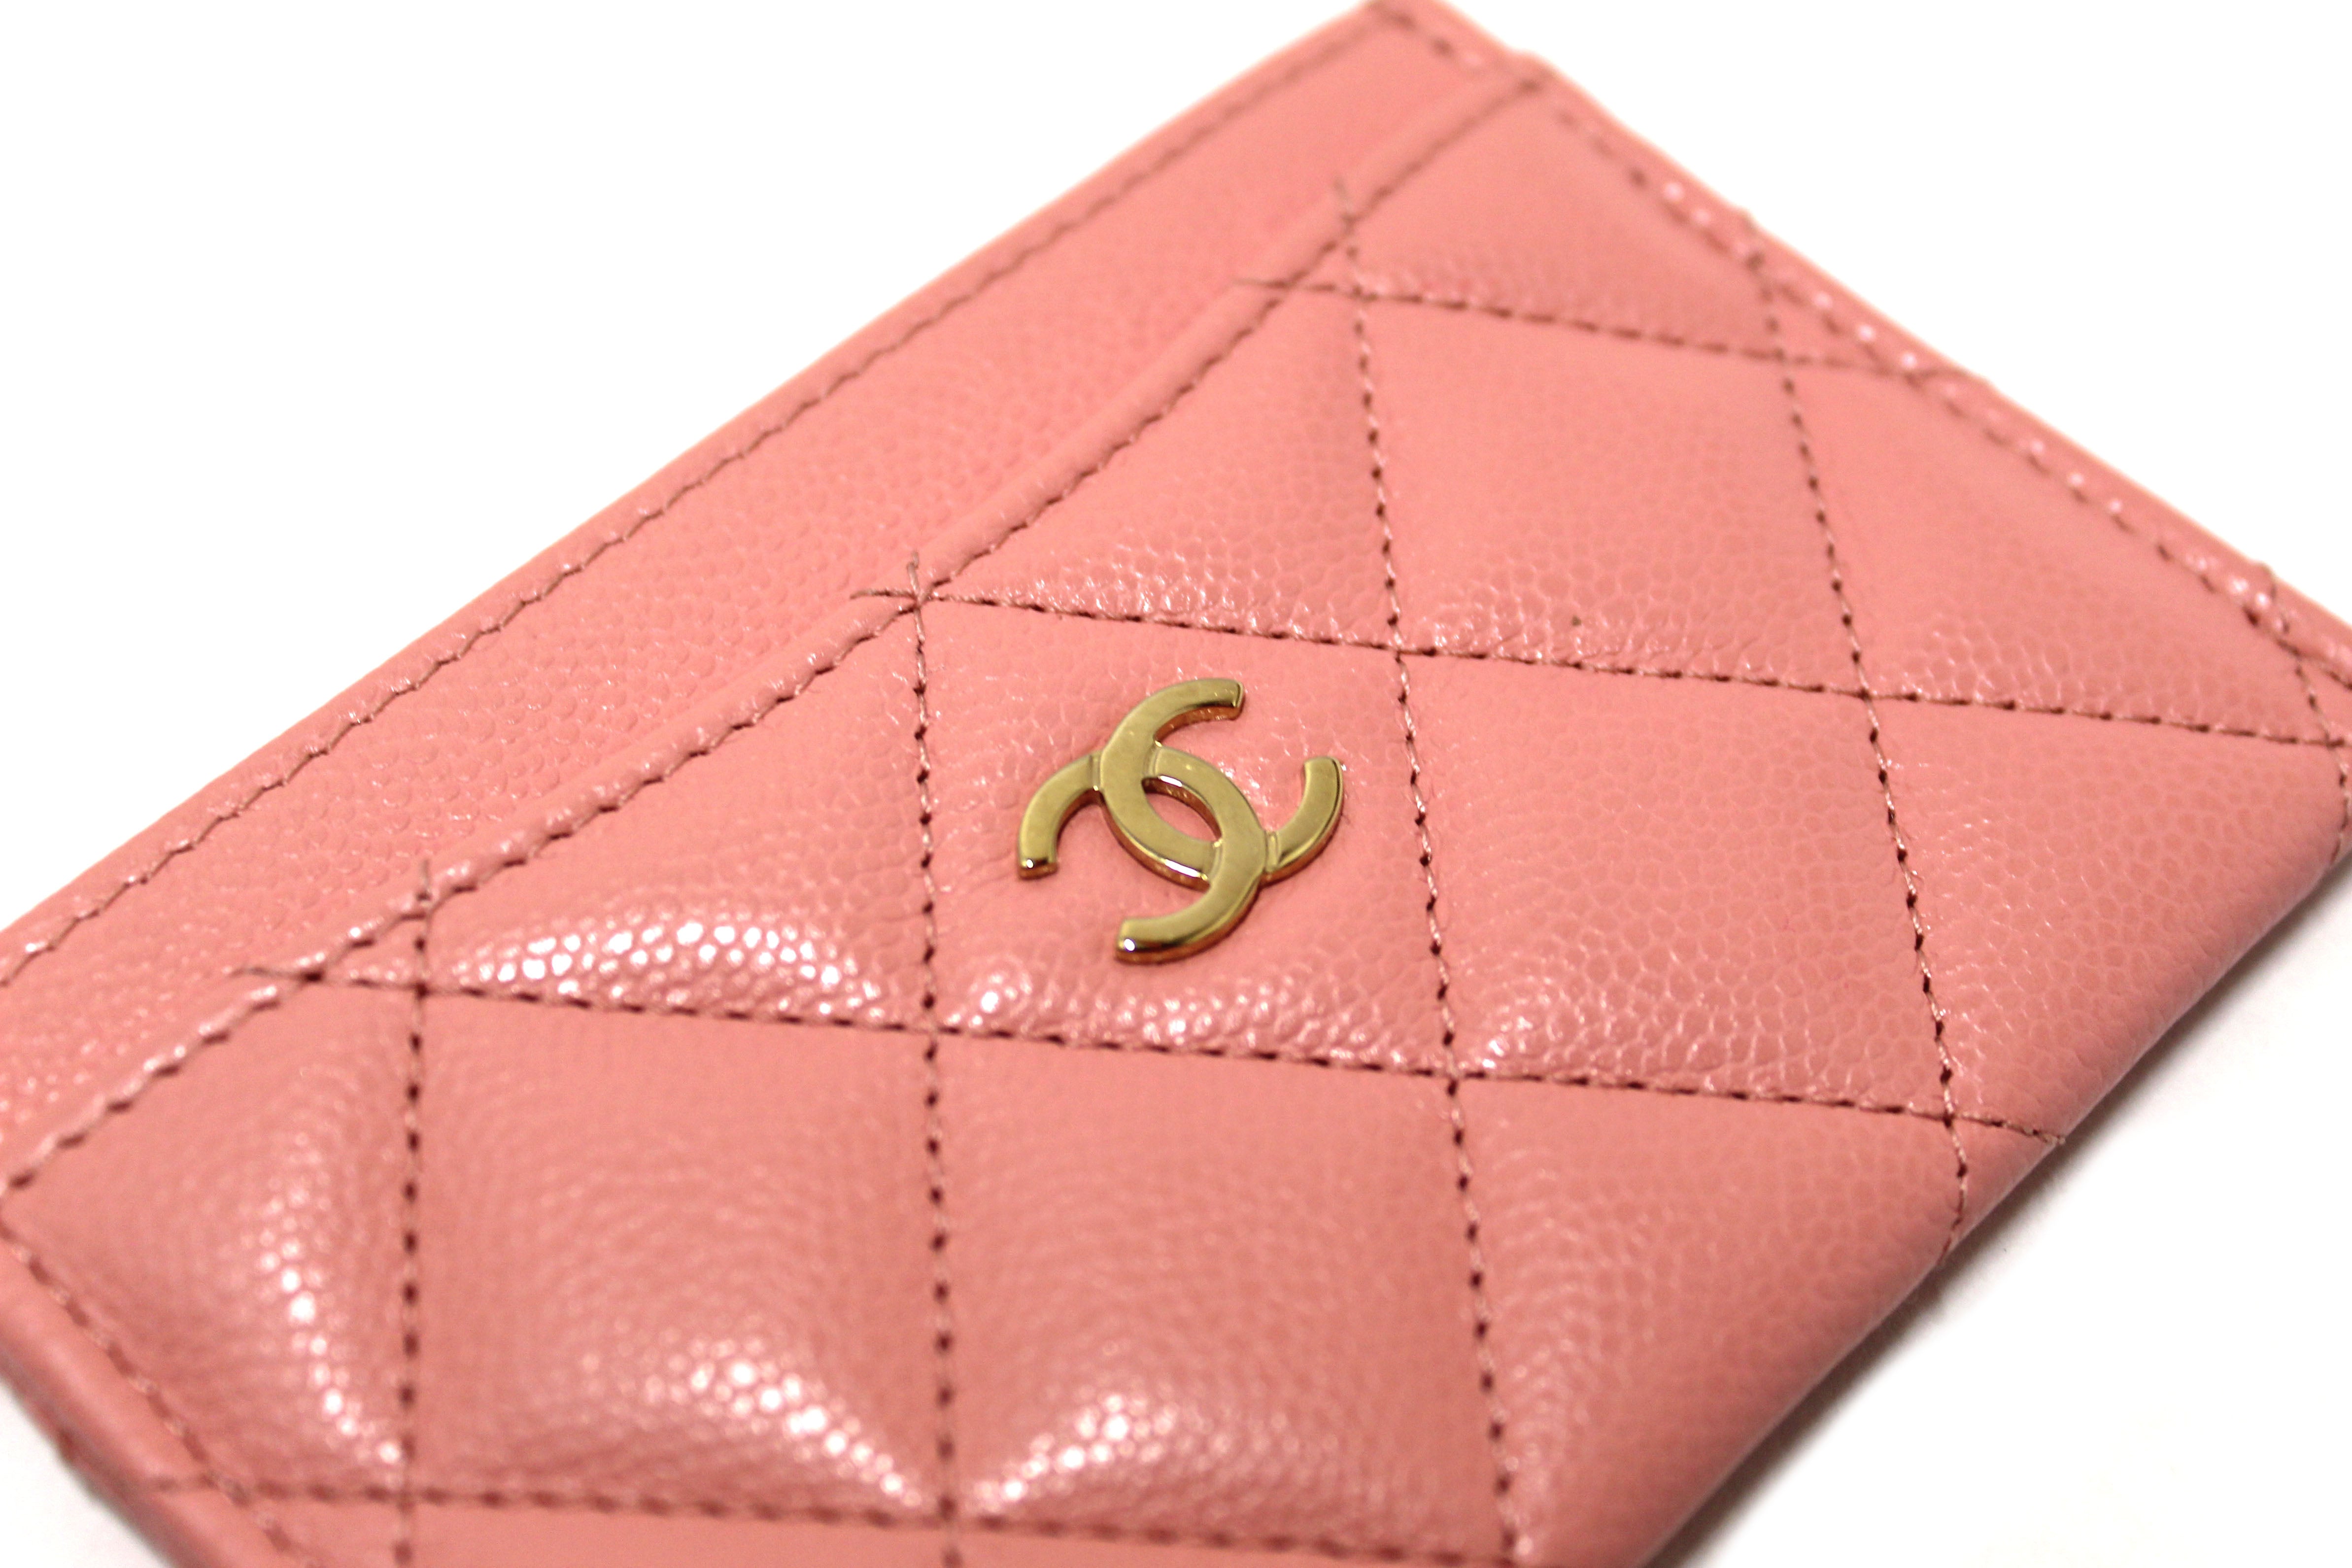 Authentic Chanel Pink Quilted Caviar Leather Card Holder